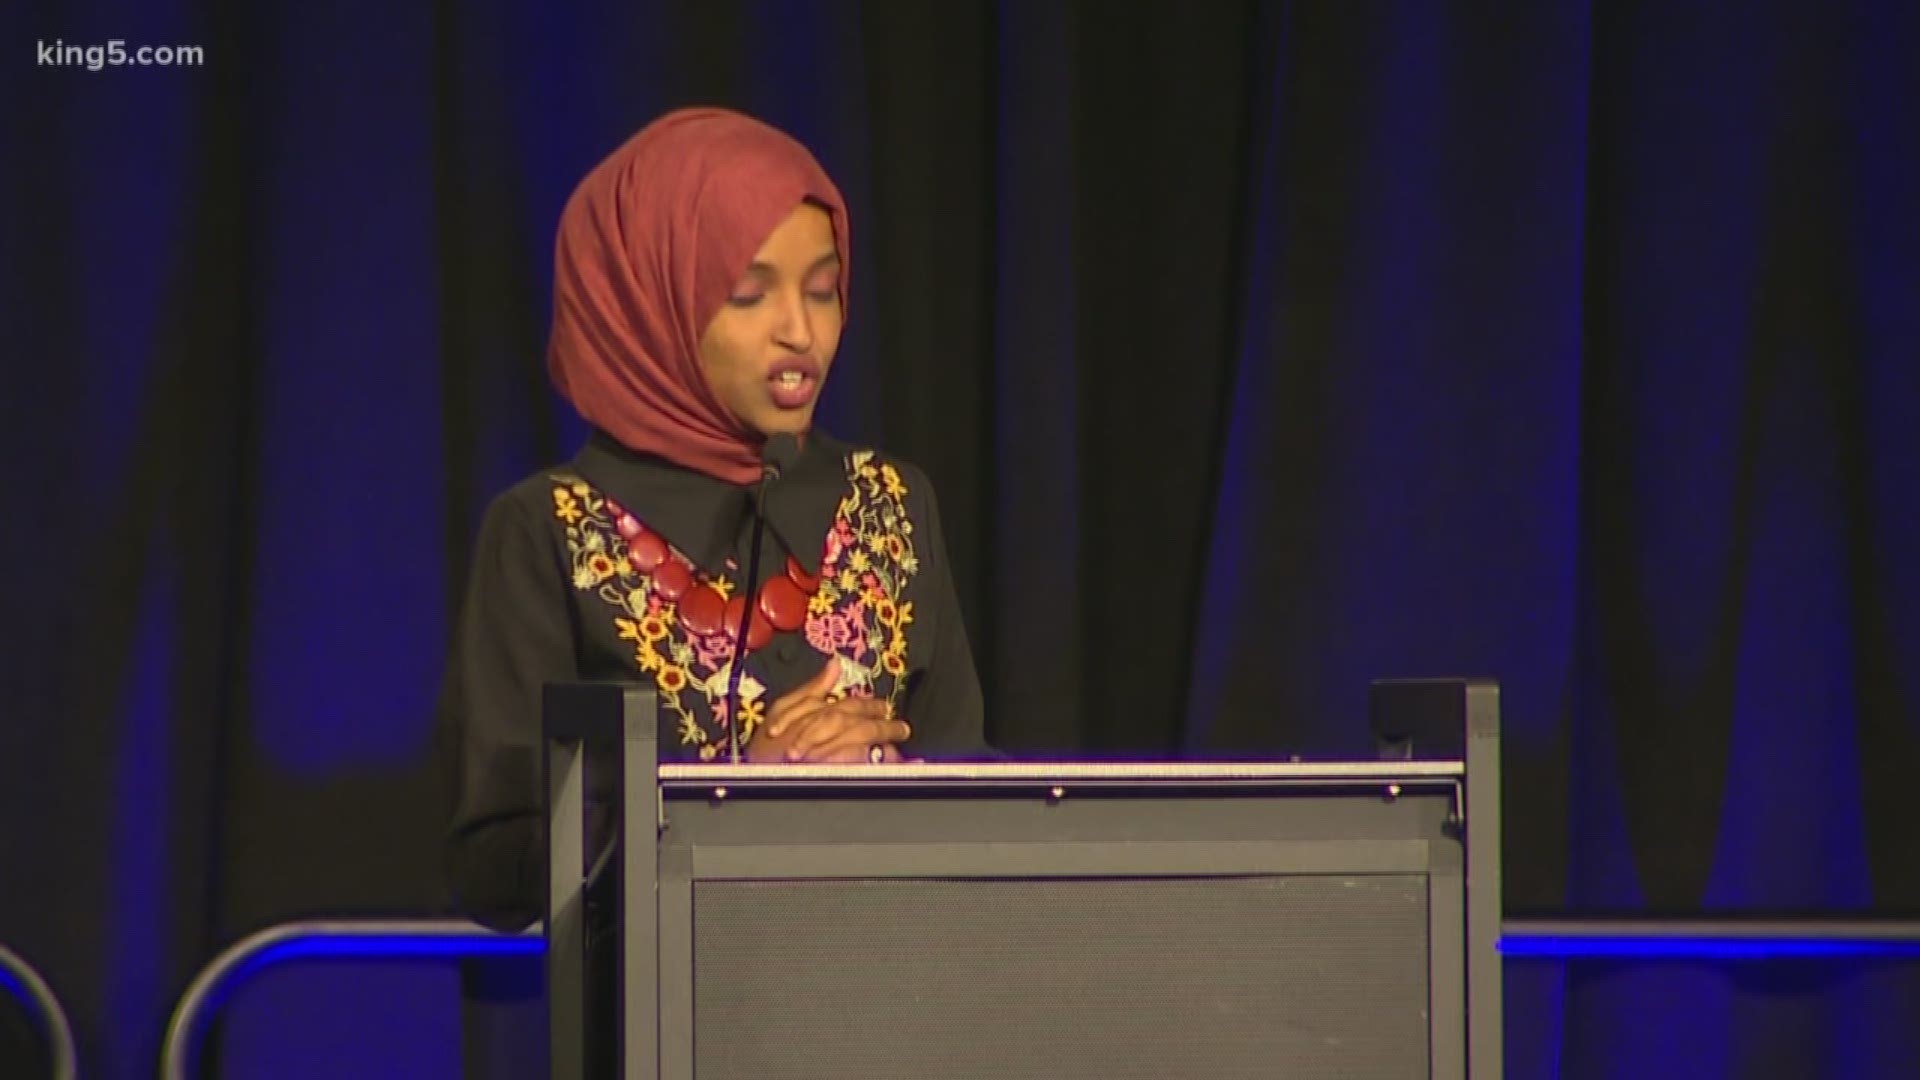 Hundreds night turned out Saturday night to hear Representative Ilhan Omar (D-MN) speak at Bellevue's Meydenbauer Center